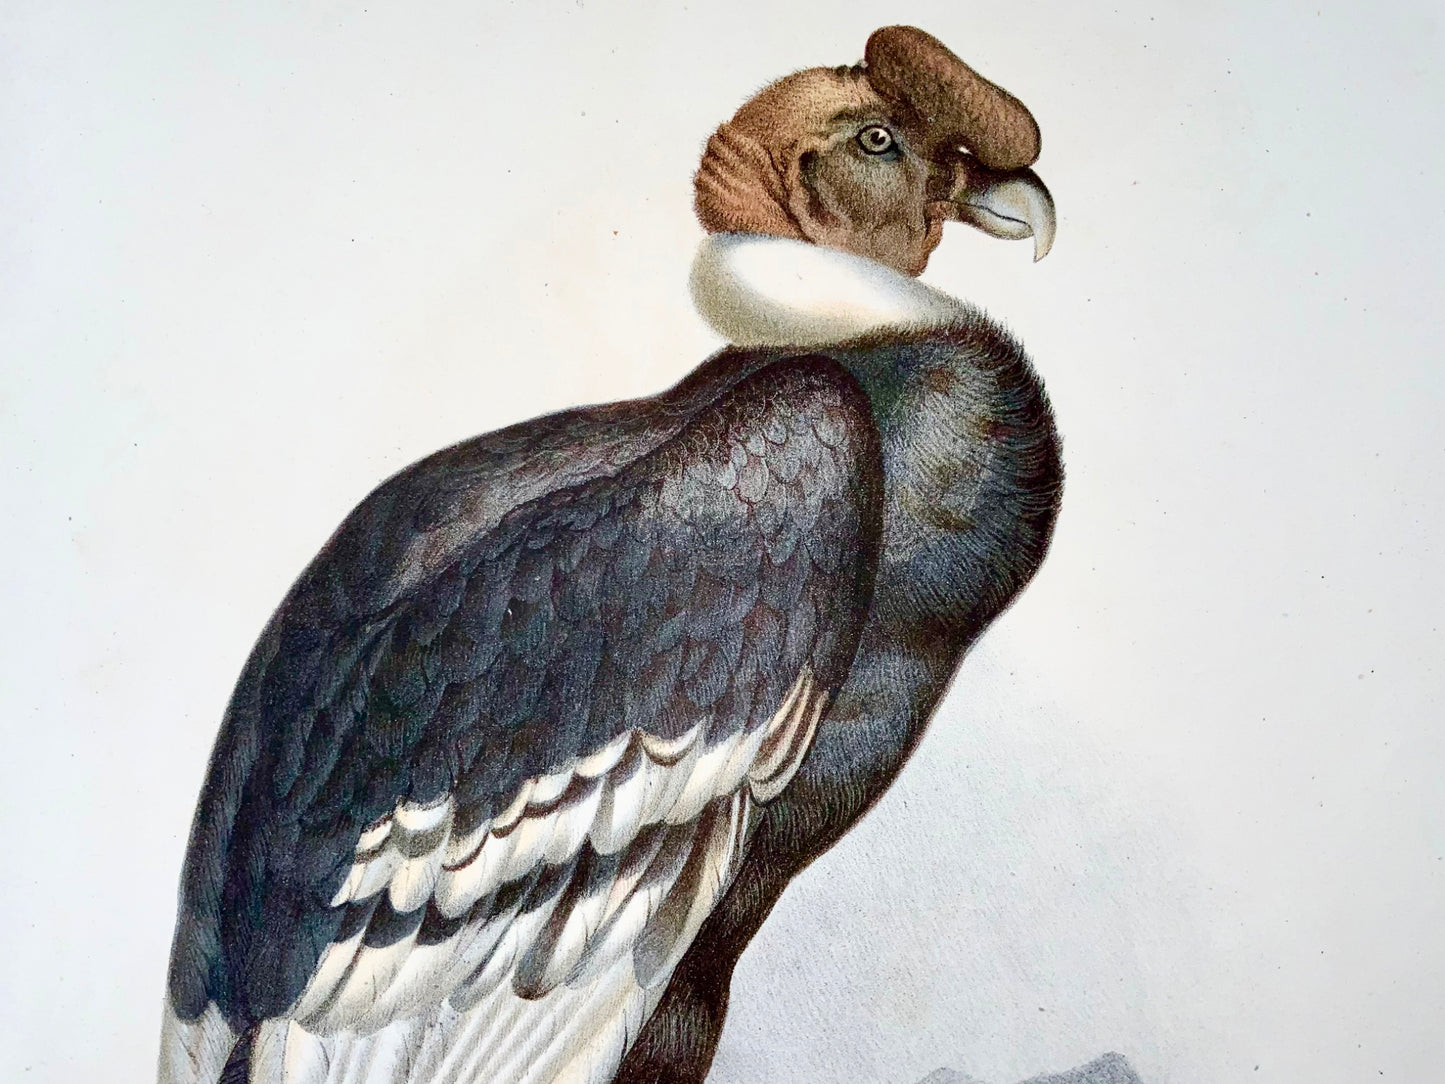 1860 Condor vulture, Fitzinger, colour lithograph with hand finish, ornithology